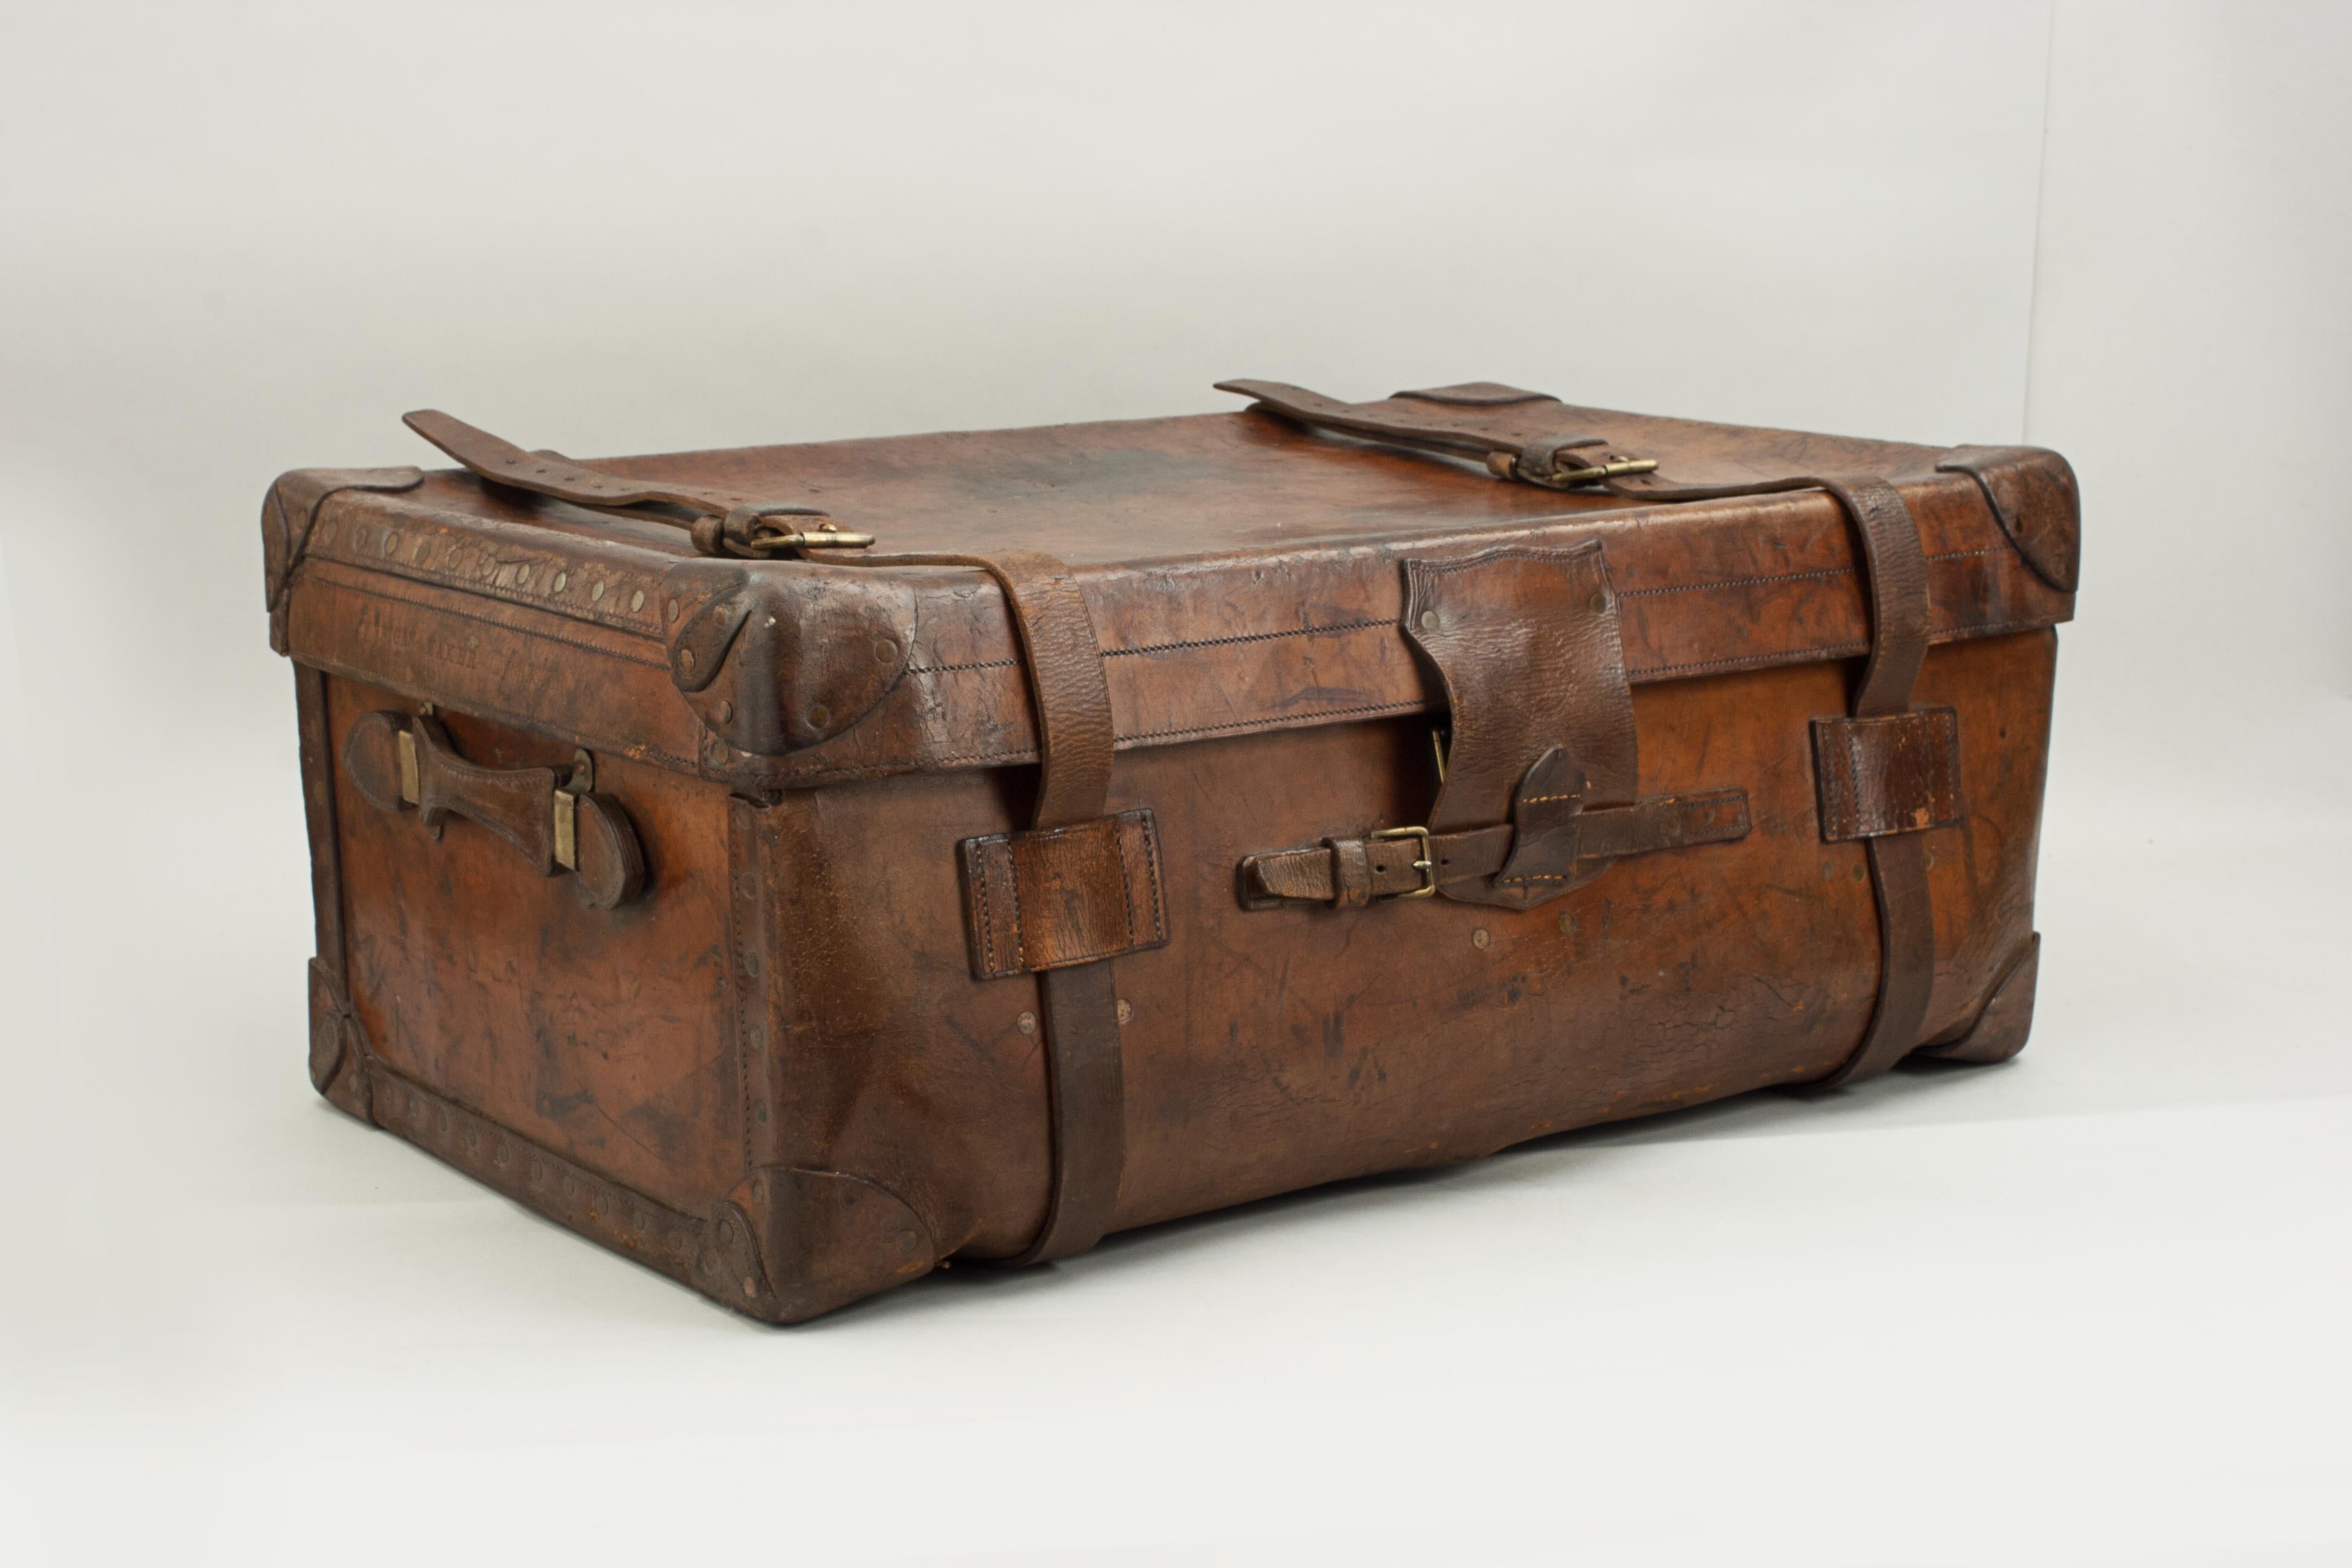 Antique Leather Trunk by Finnigans, Bond Street, London Luggage 8